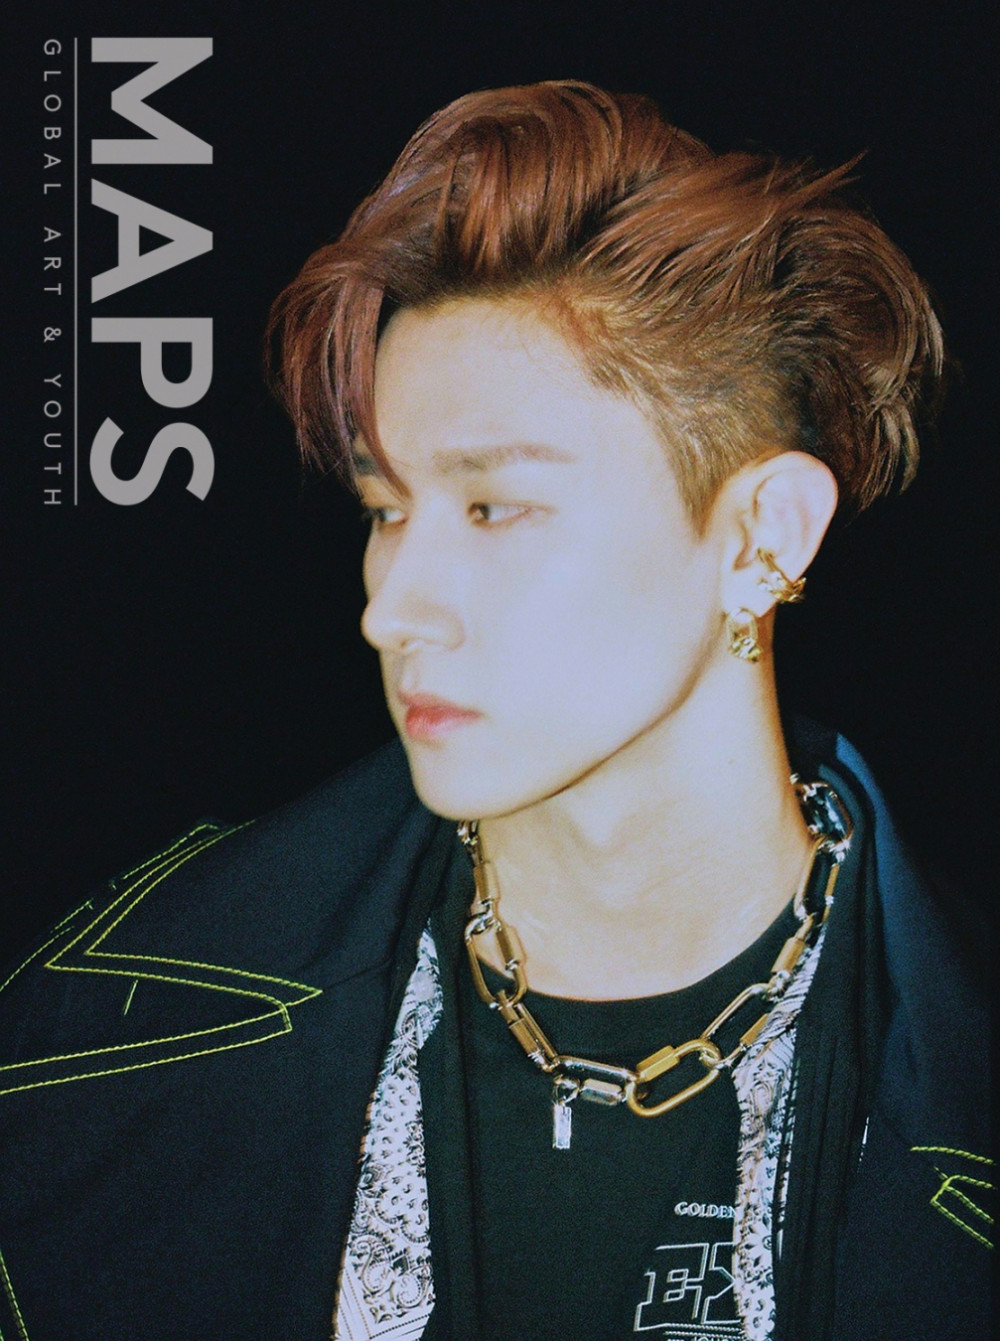 monsta-x-i-m-reveals-his-first-ever-solo-photoshoot-maps-2